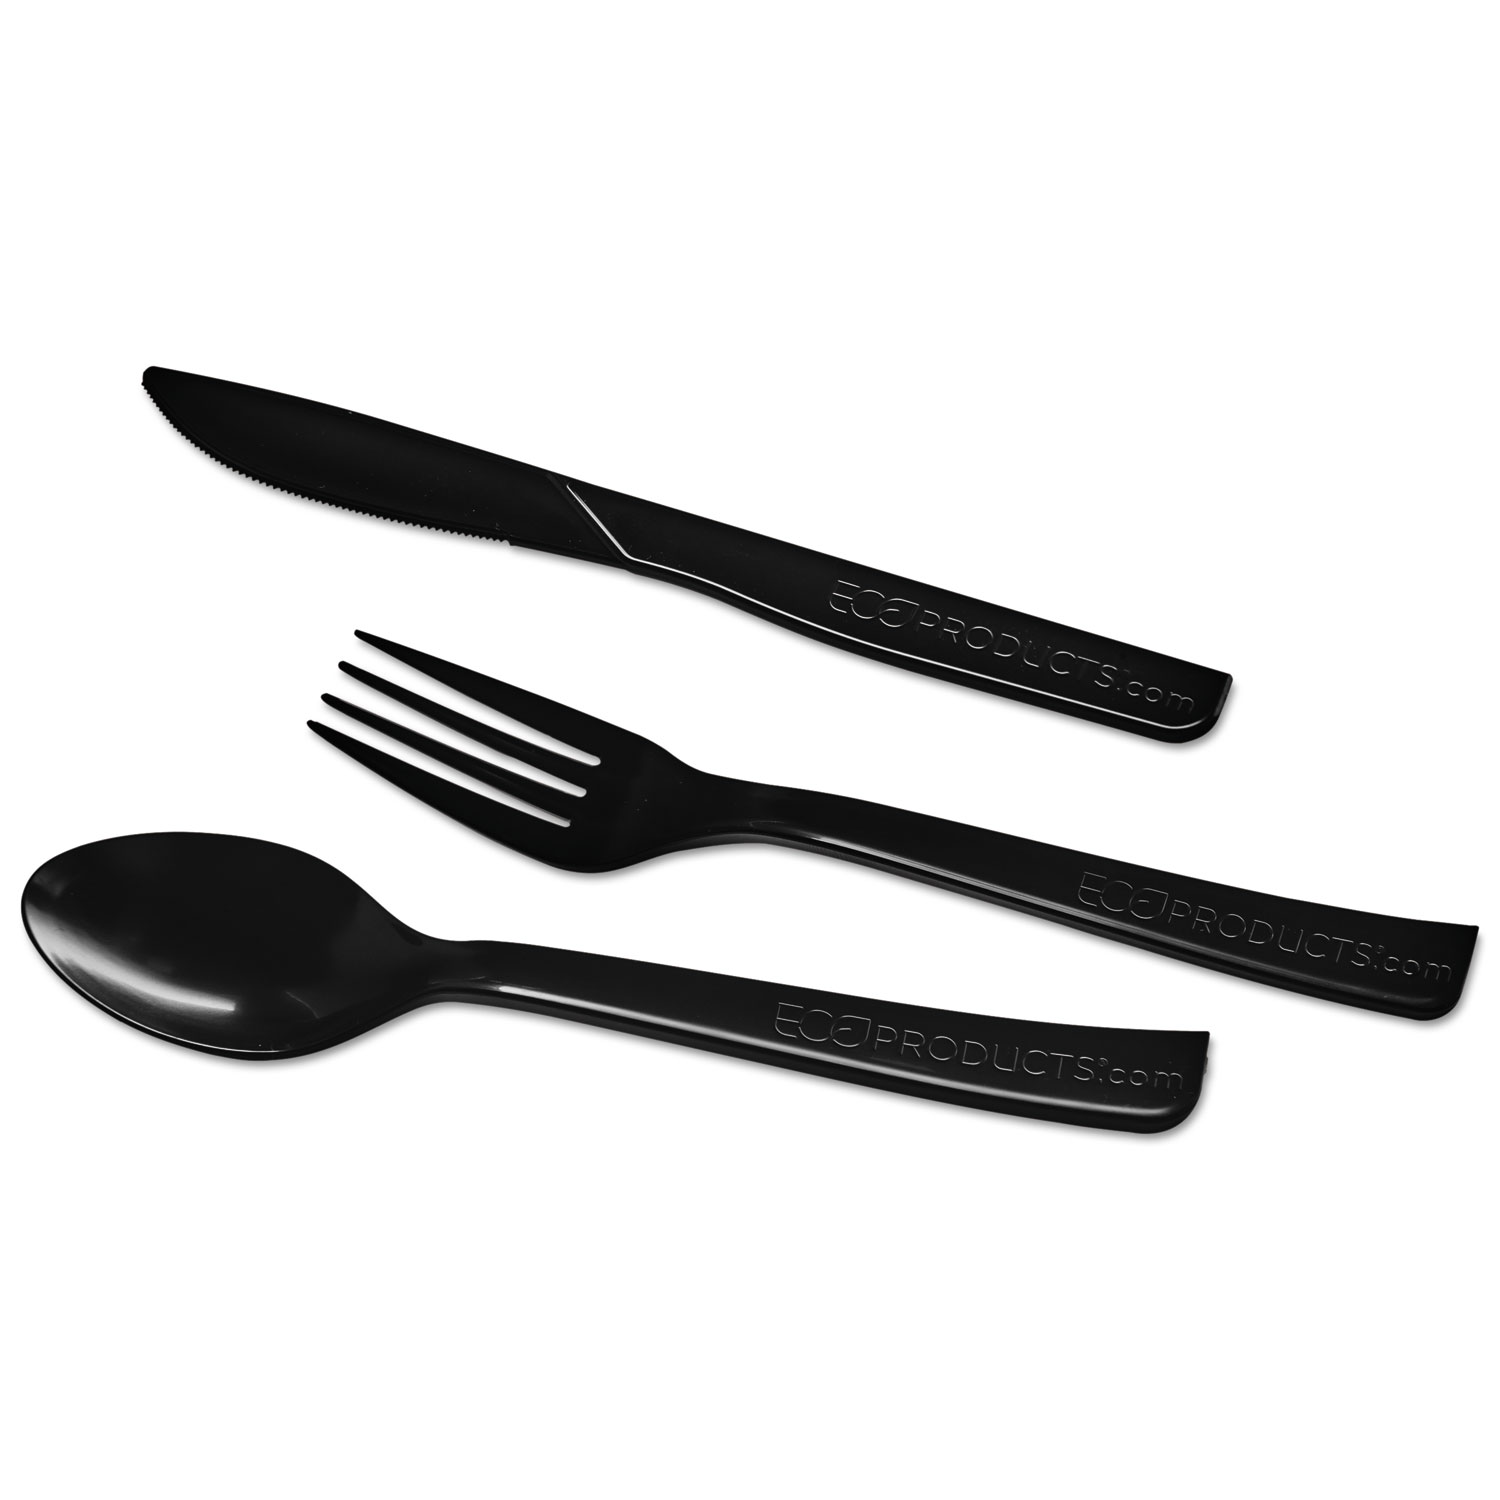 100% Recycled Content Fork - 6, 50/PK, 20 PK/CT